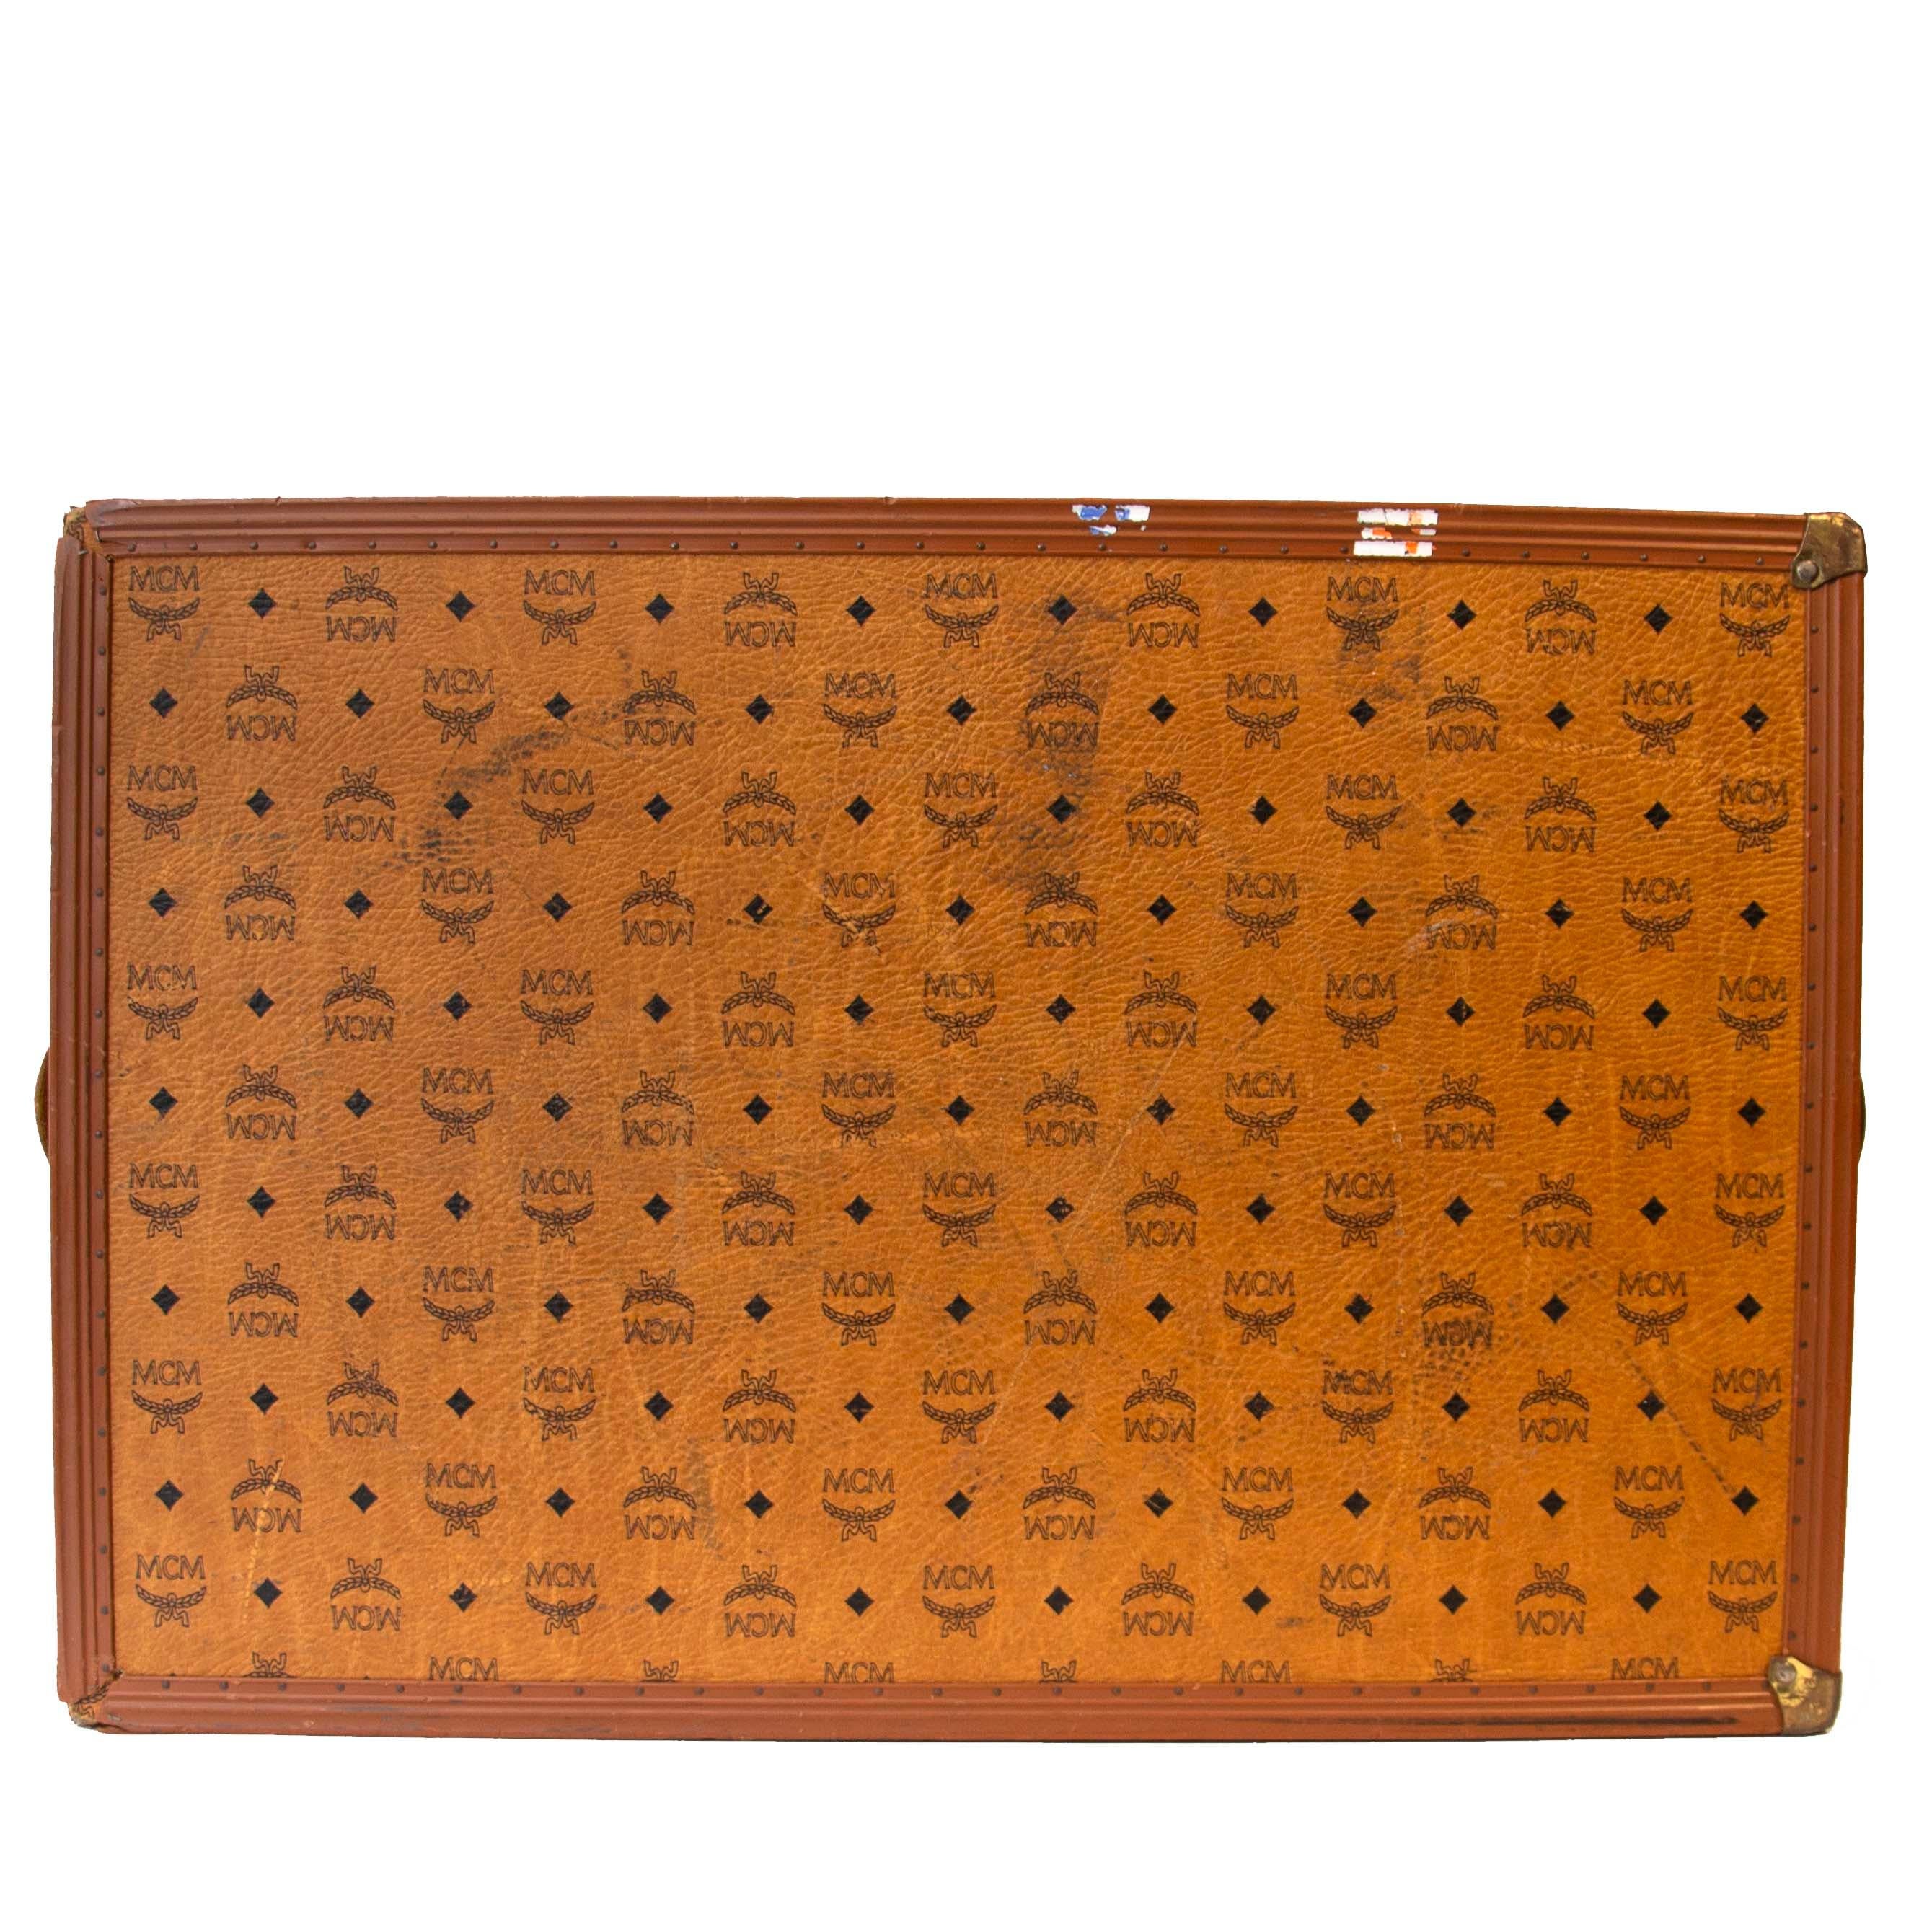 Wonderful 100% authentic MCM Large Cognac Travel Trunk Luggage available to spice up your travels or home interior!
Cognac monogram leather, gold toned hardware, leather handles. 